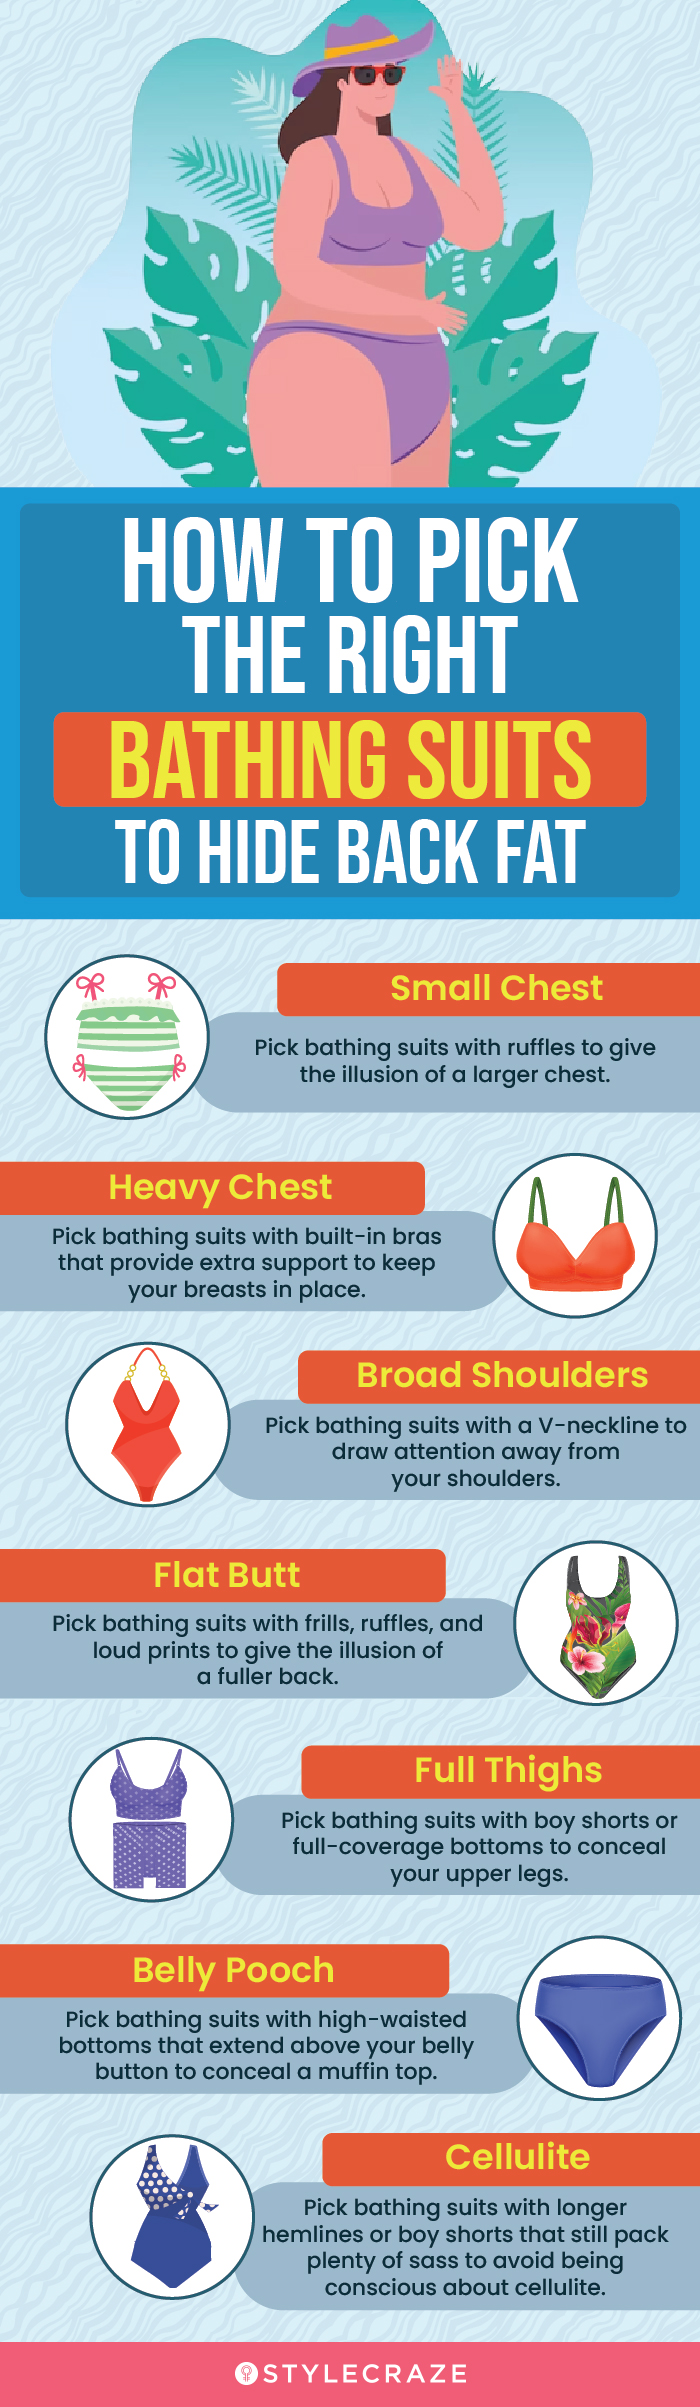 How To Pick The Right Bathing Suits To Hide Back Fat (infographic)